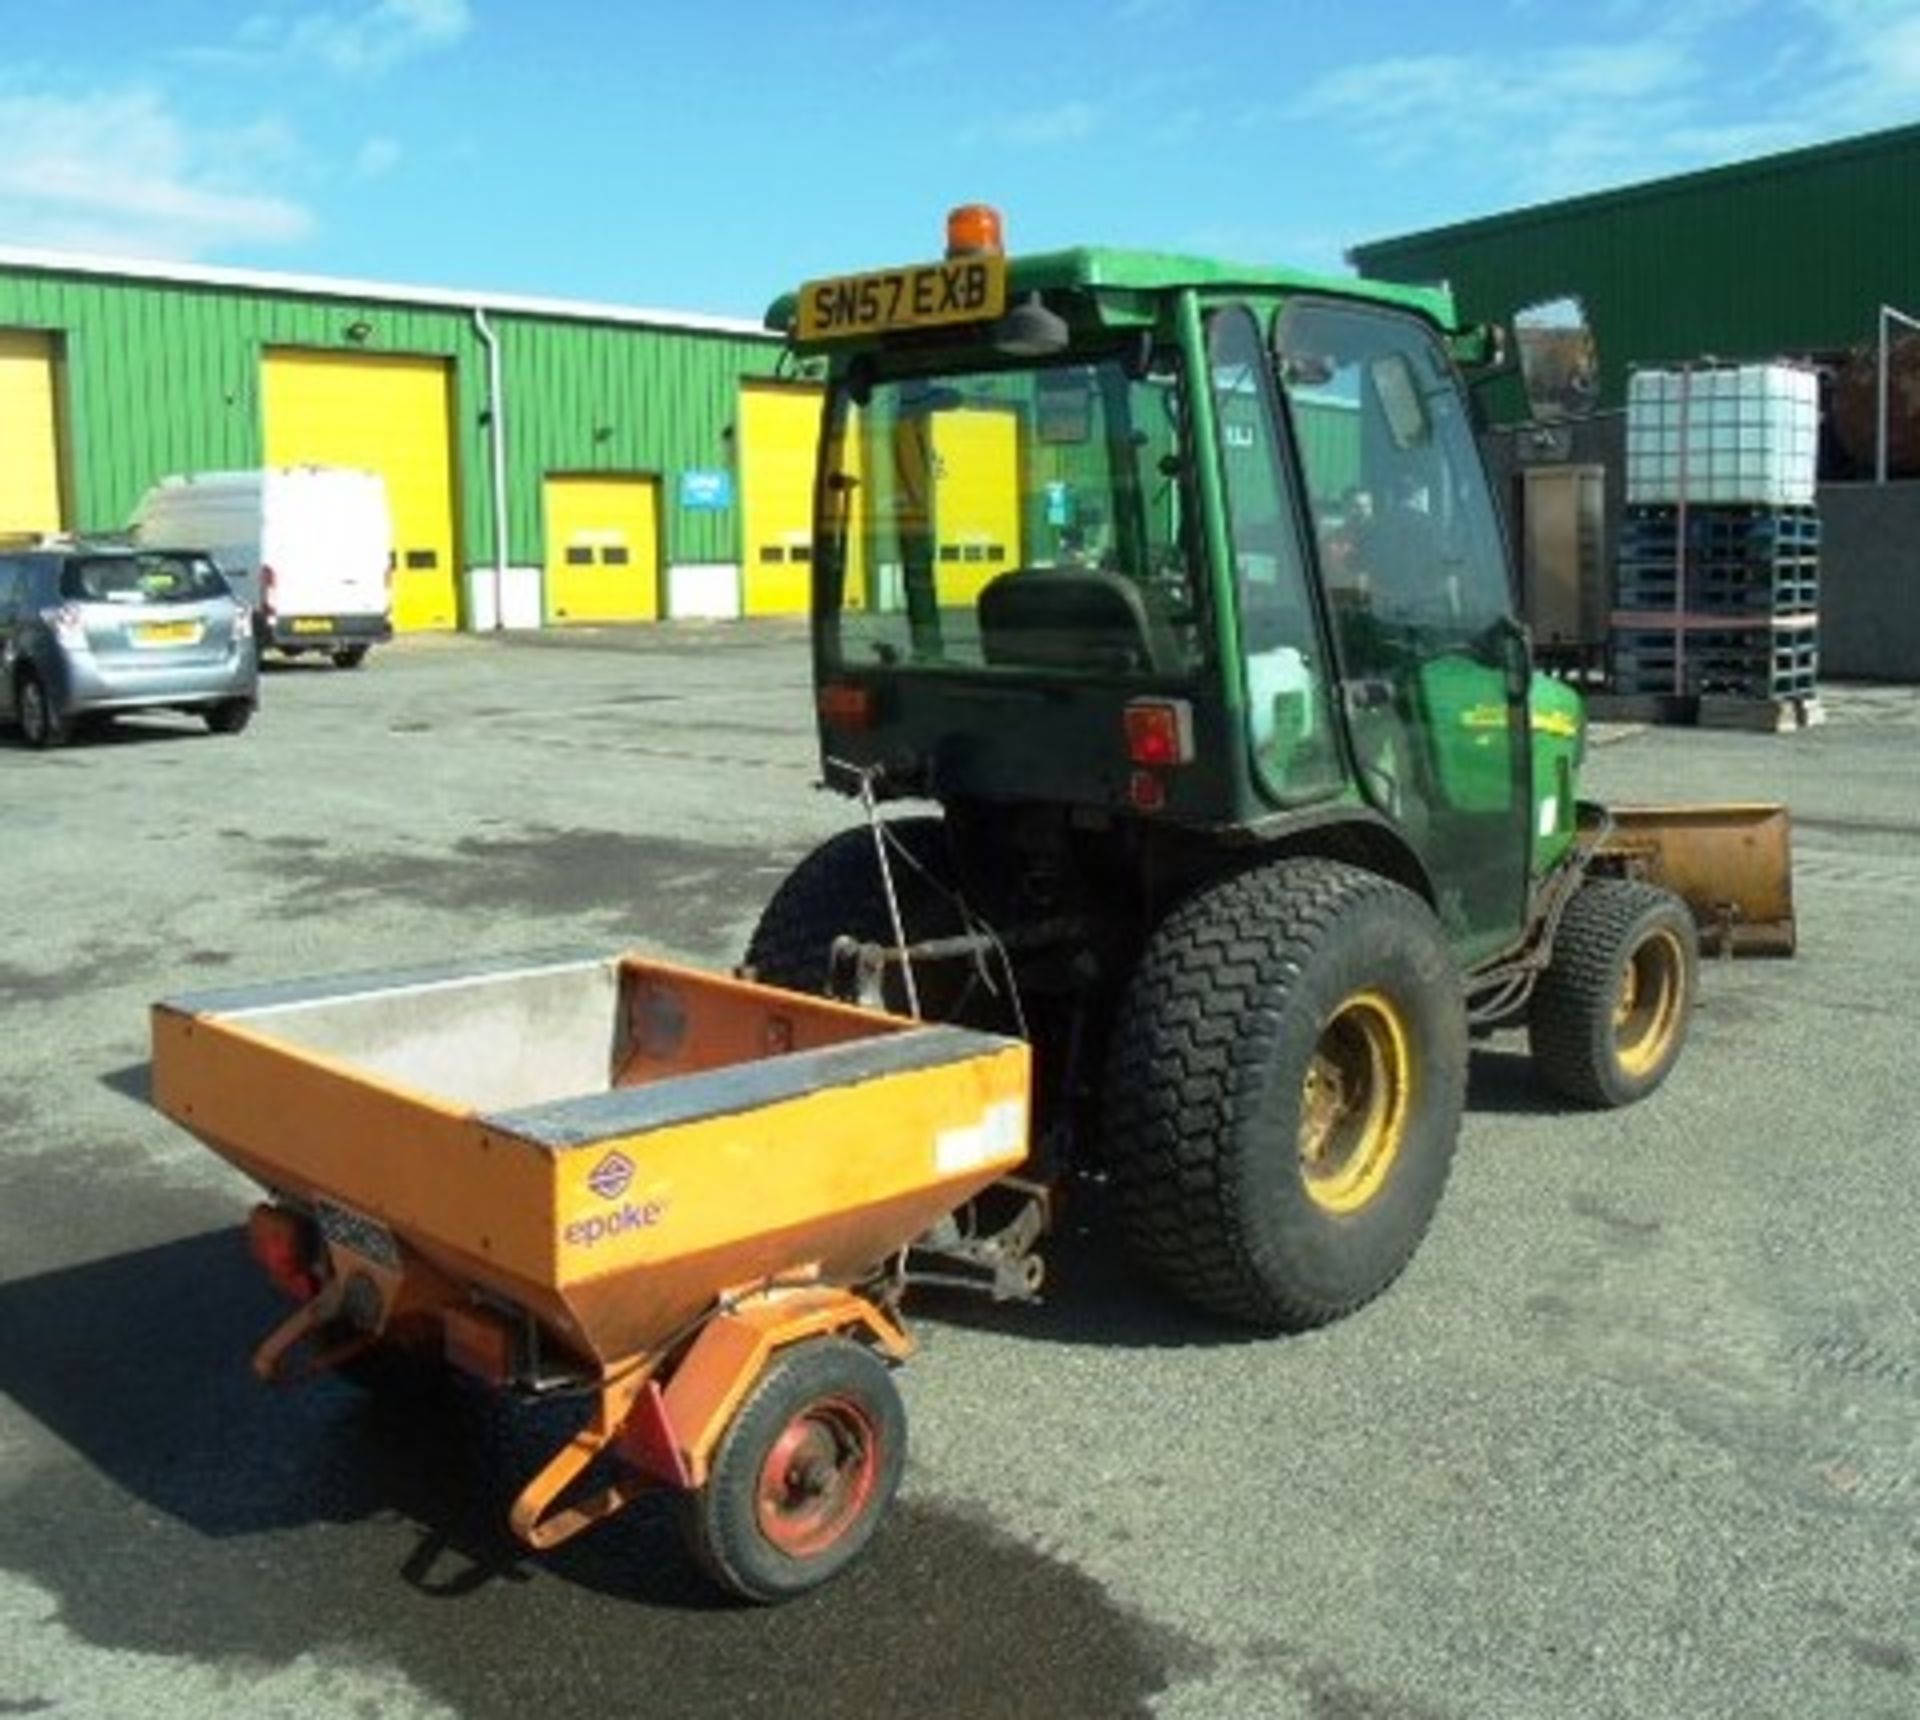 2007 JOHN DEERE 2520 MST Tractor Reg No SN57 EXB c/w rear trailed salt spreader and snow plough. 90 - Image 18 of 22